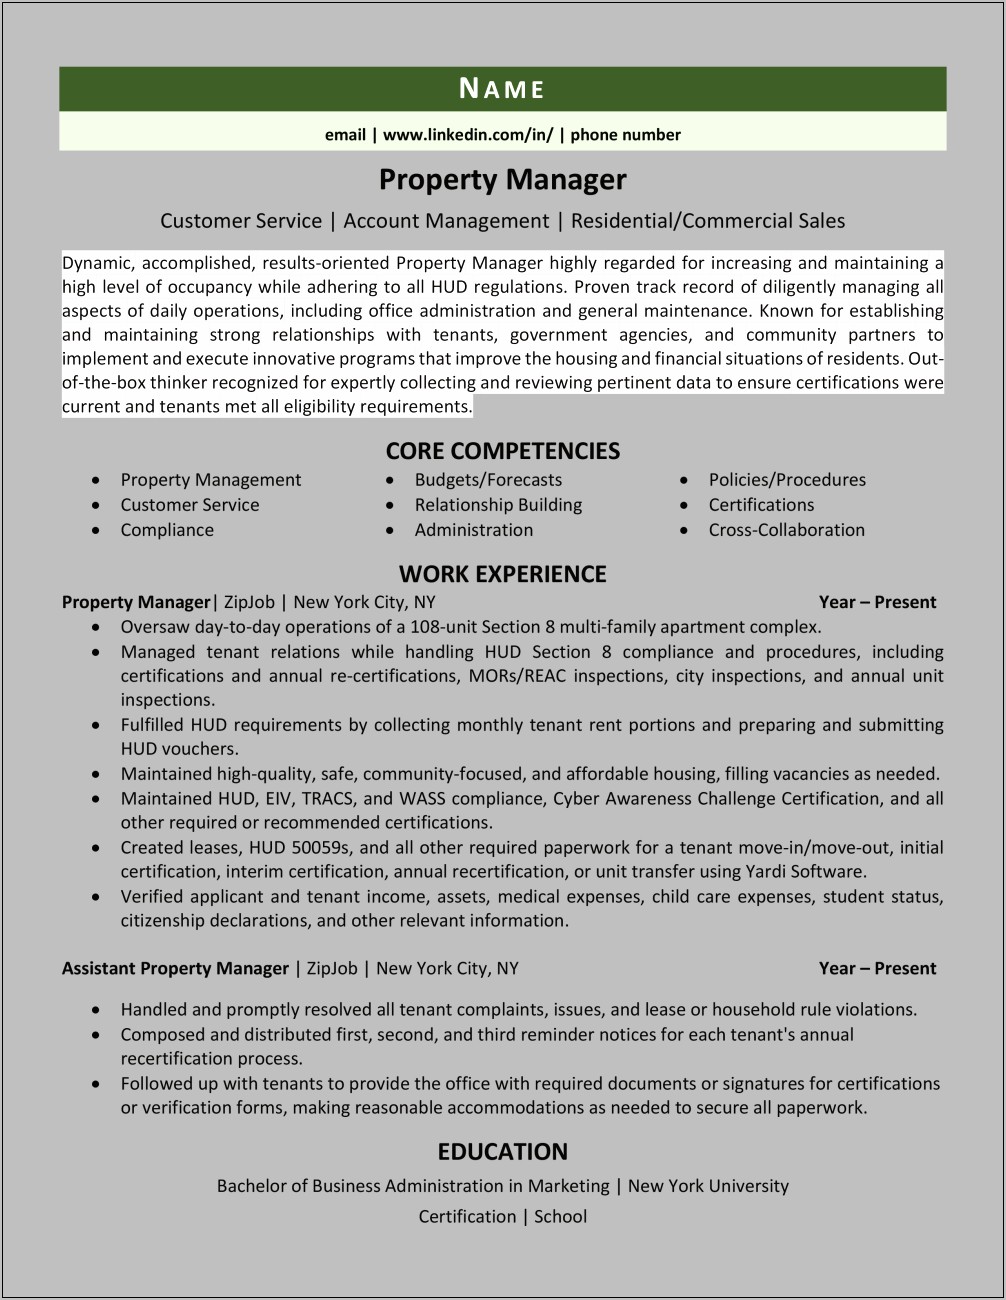 Professional Short Summary For Resident Manager Resume